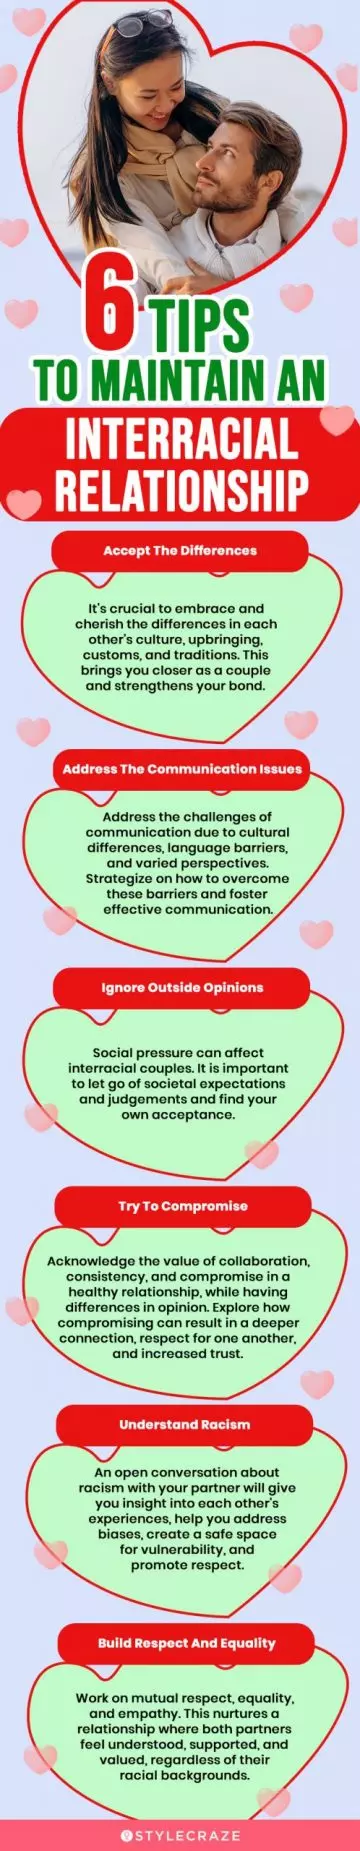 6 tips to maintain an interracial relationship (infographic)